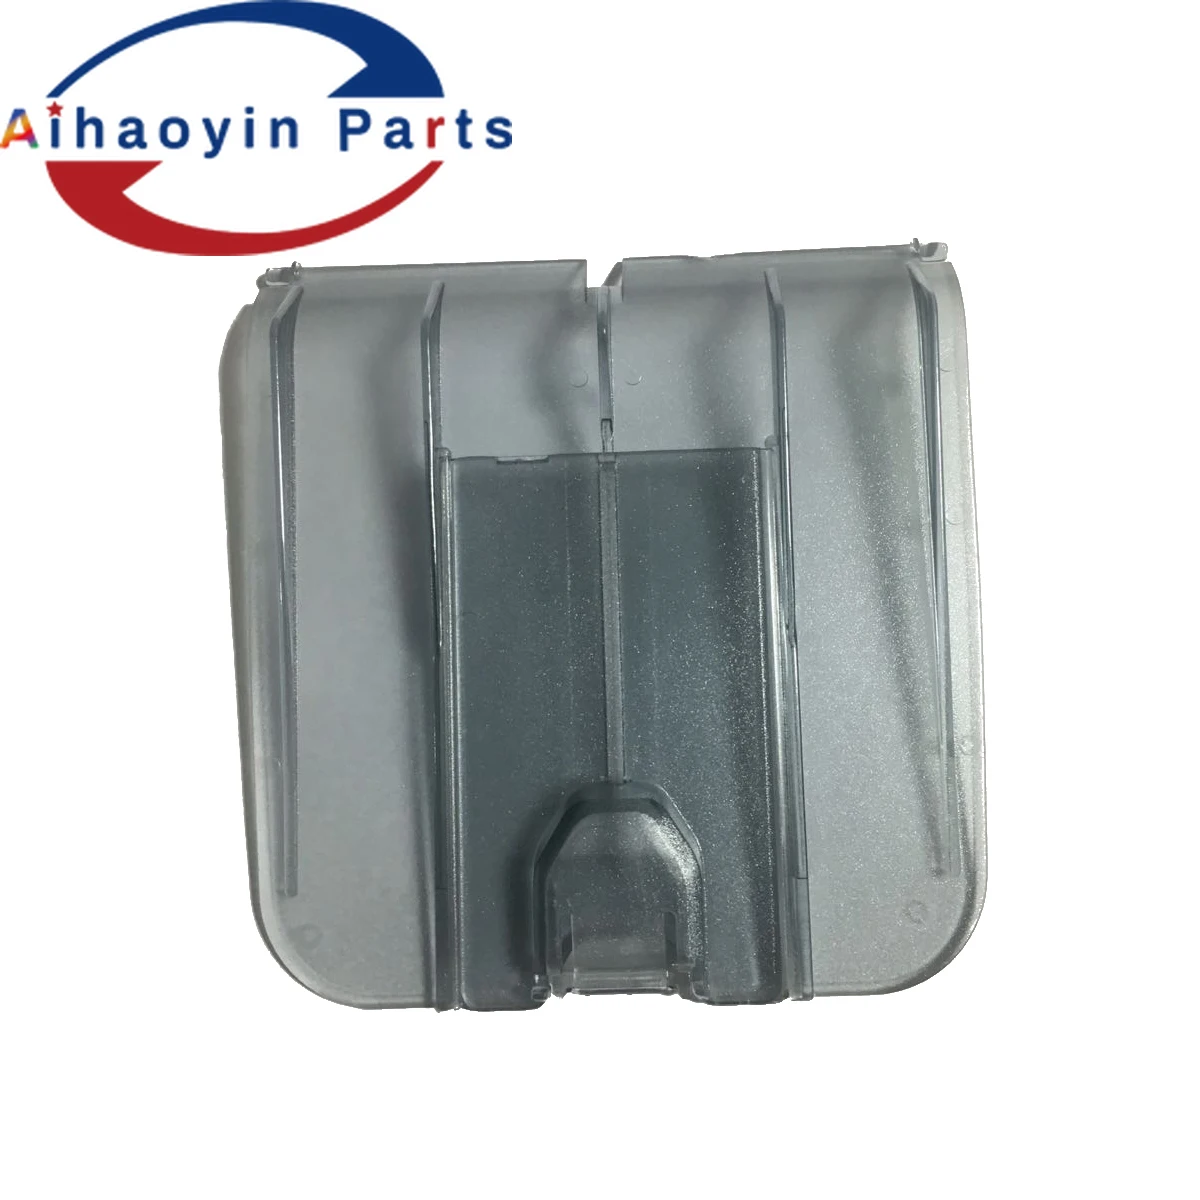 

1X RM1-0859-000 RM1-0859 RM1-0859-000CN Tray for HP LaserJet M1005 3015 3020 3030 OUTPUT TRAY ASSY Delivery Tray Assembly